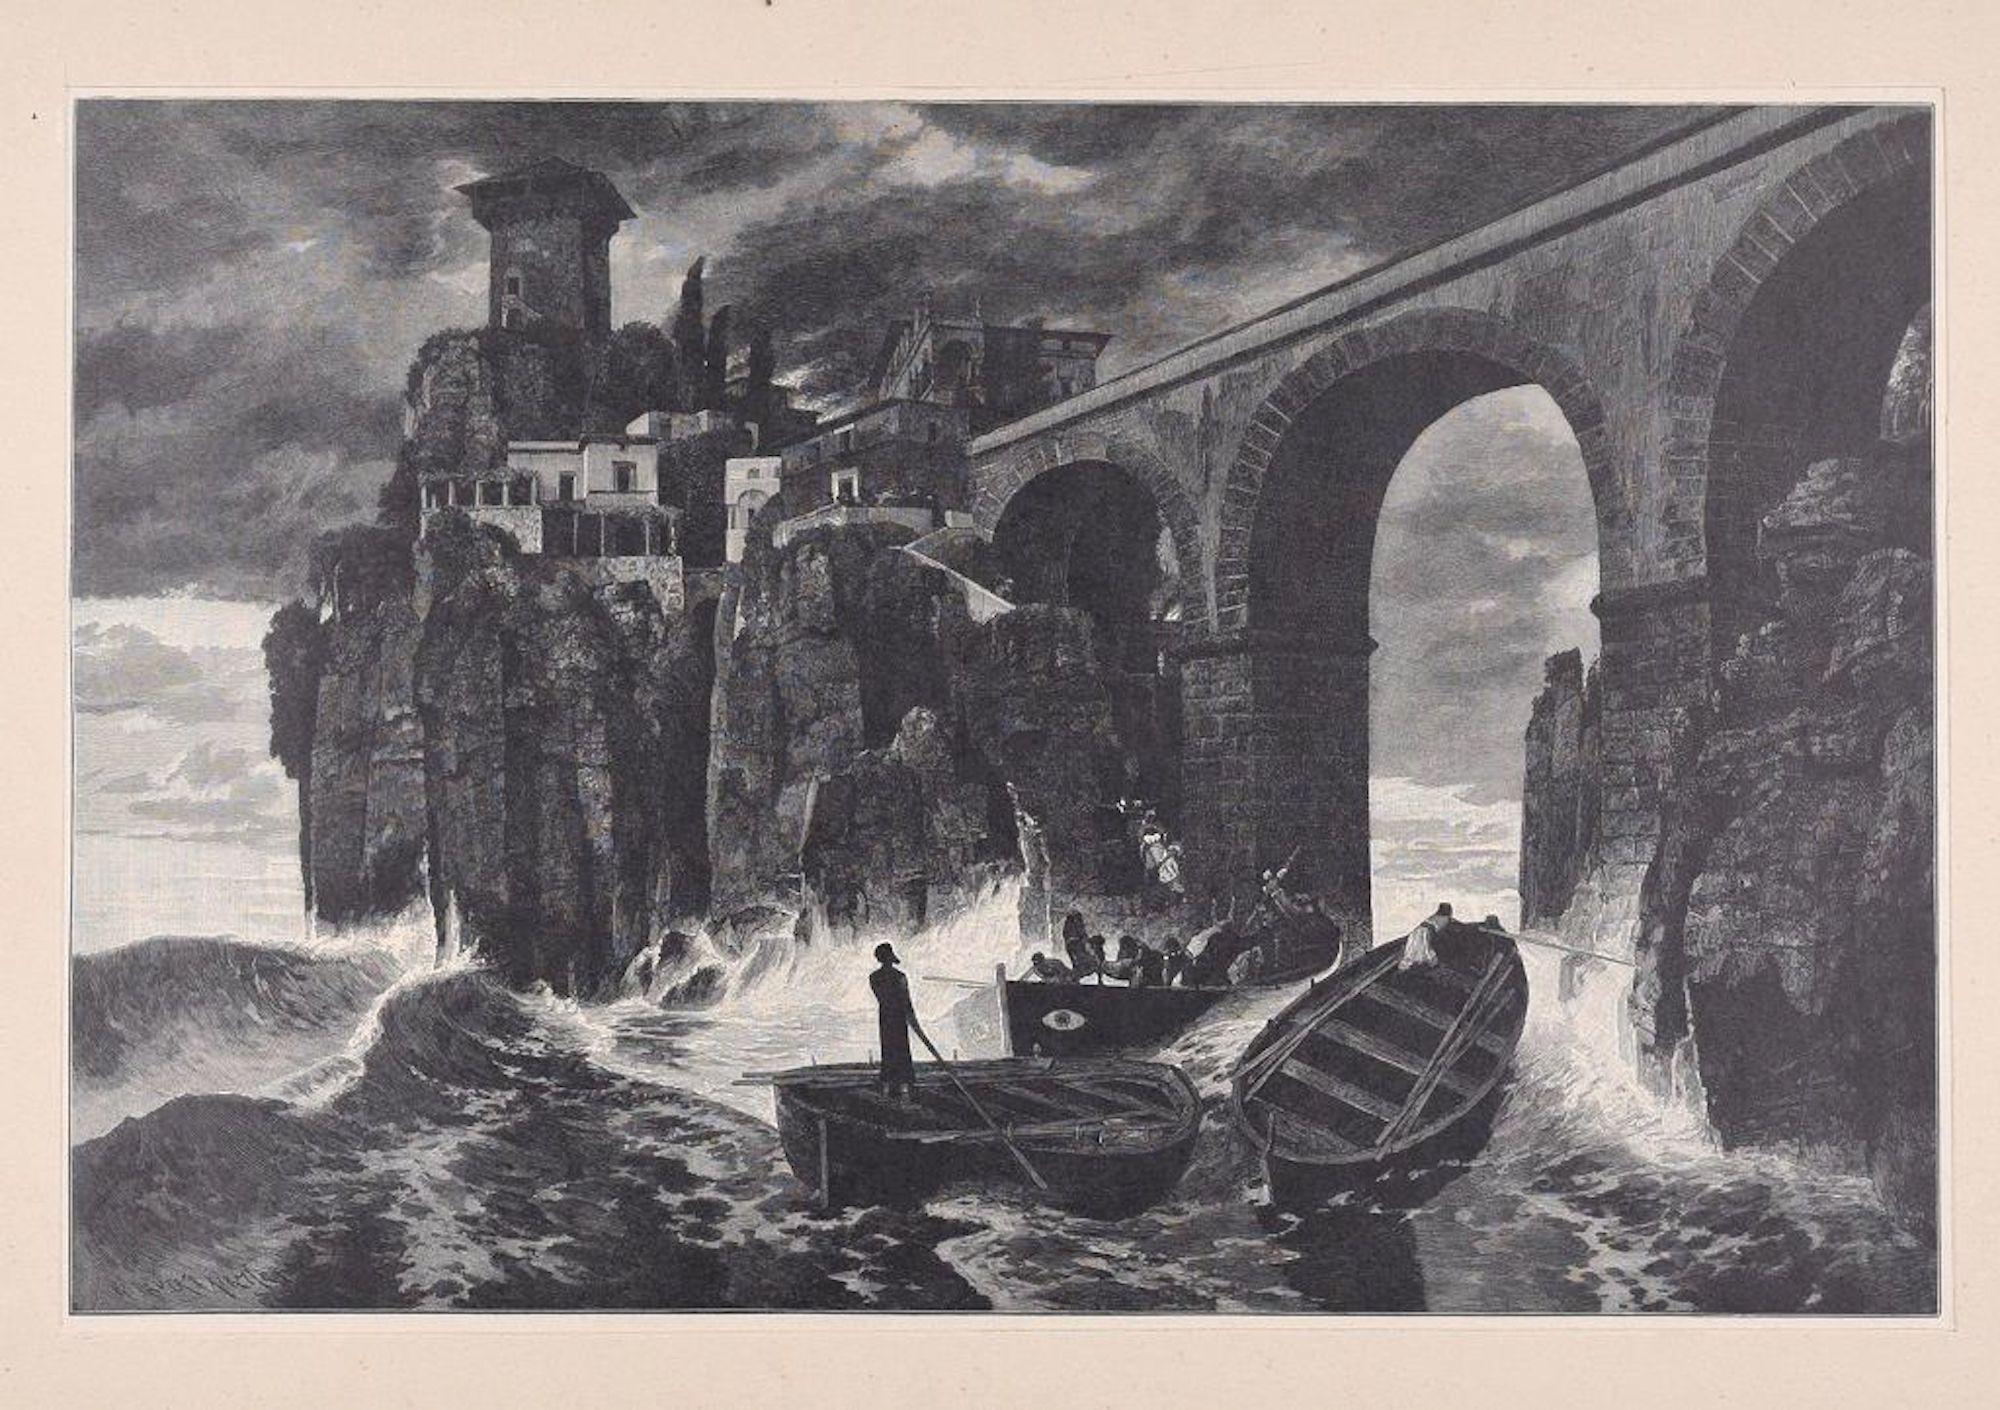 Pirates attack the Castle on the Sea - Original Woodcut by J.J. Weber - 1898